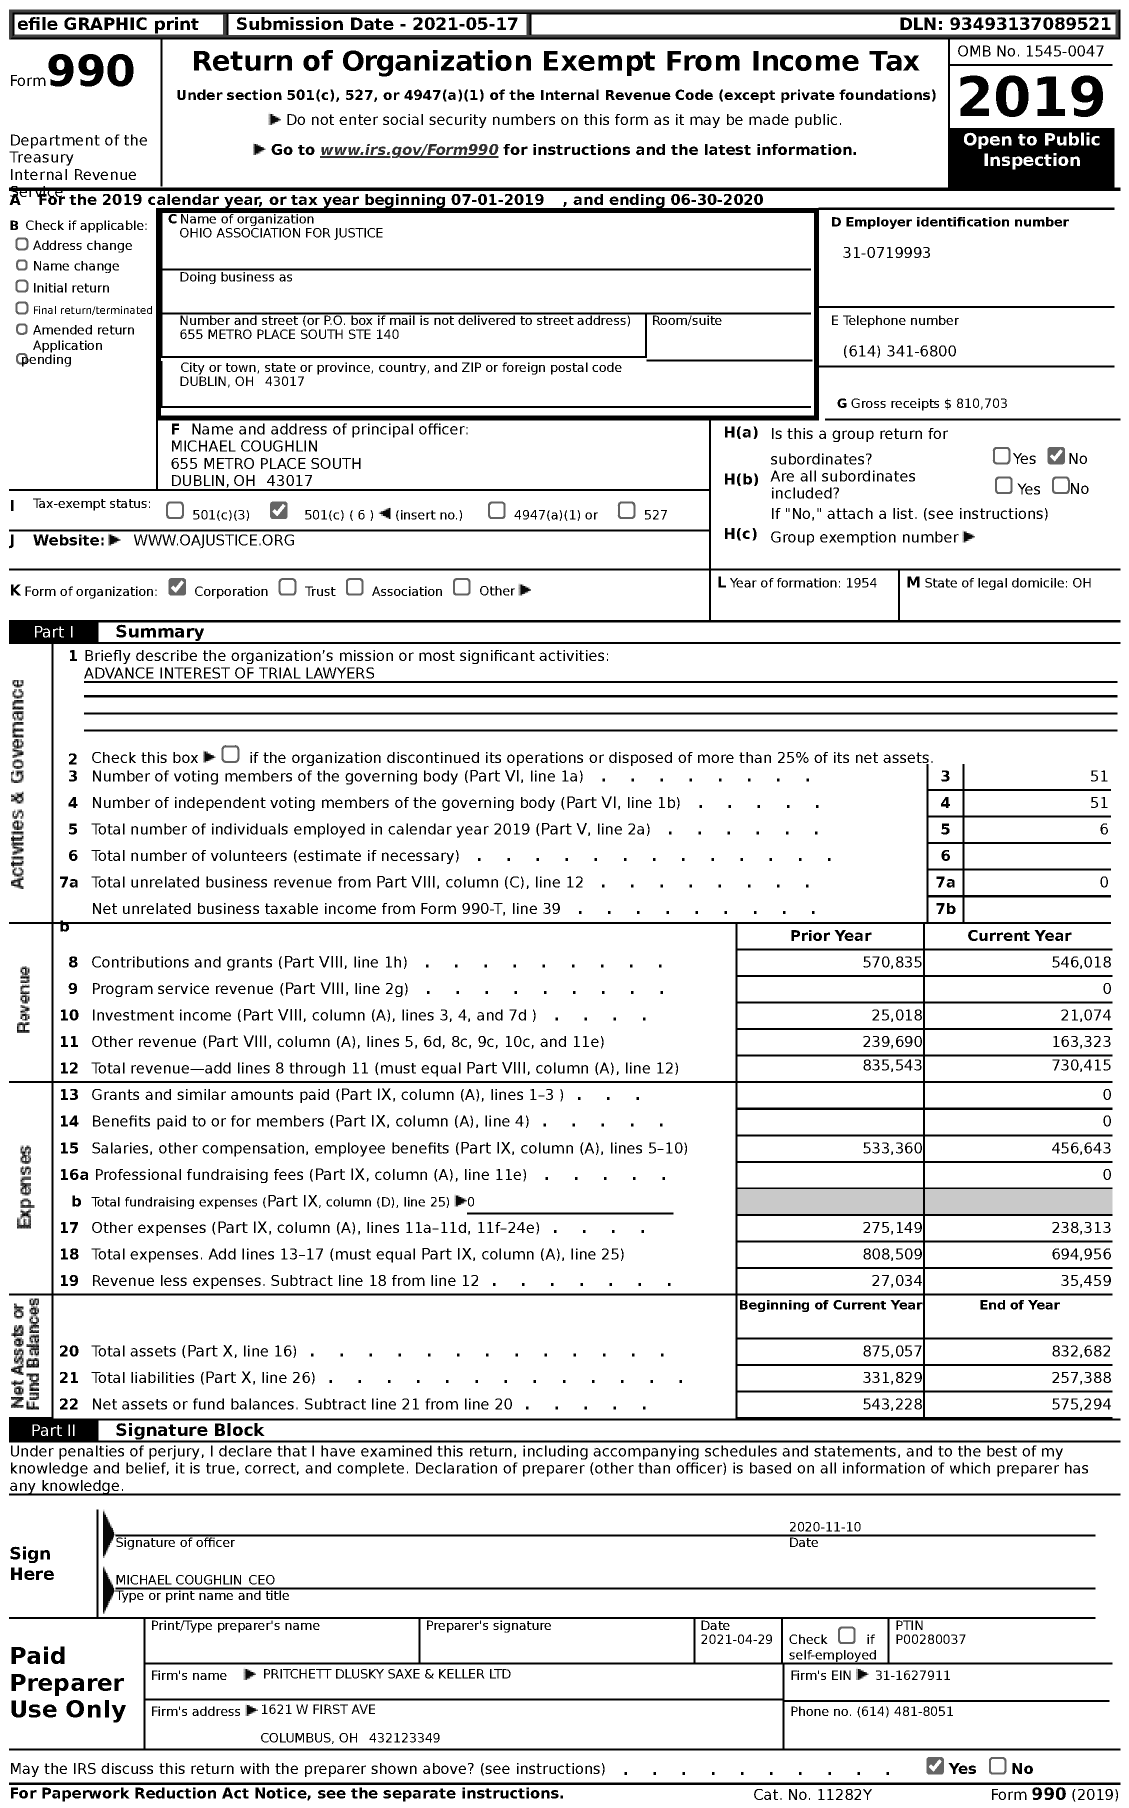 Image of first page of 2019 Form 990 for Ohio Association for Justice (OAJ)